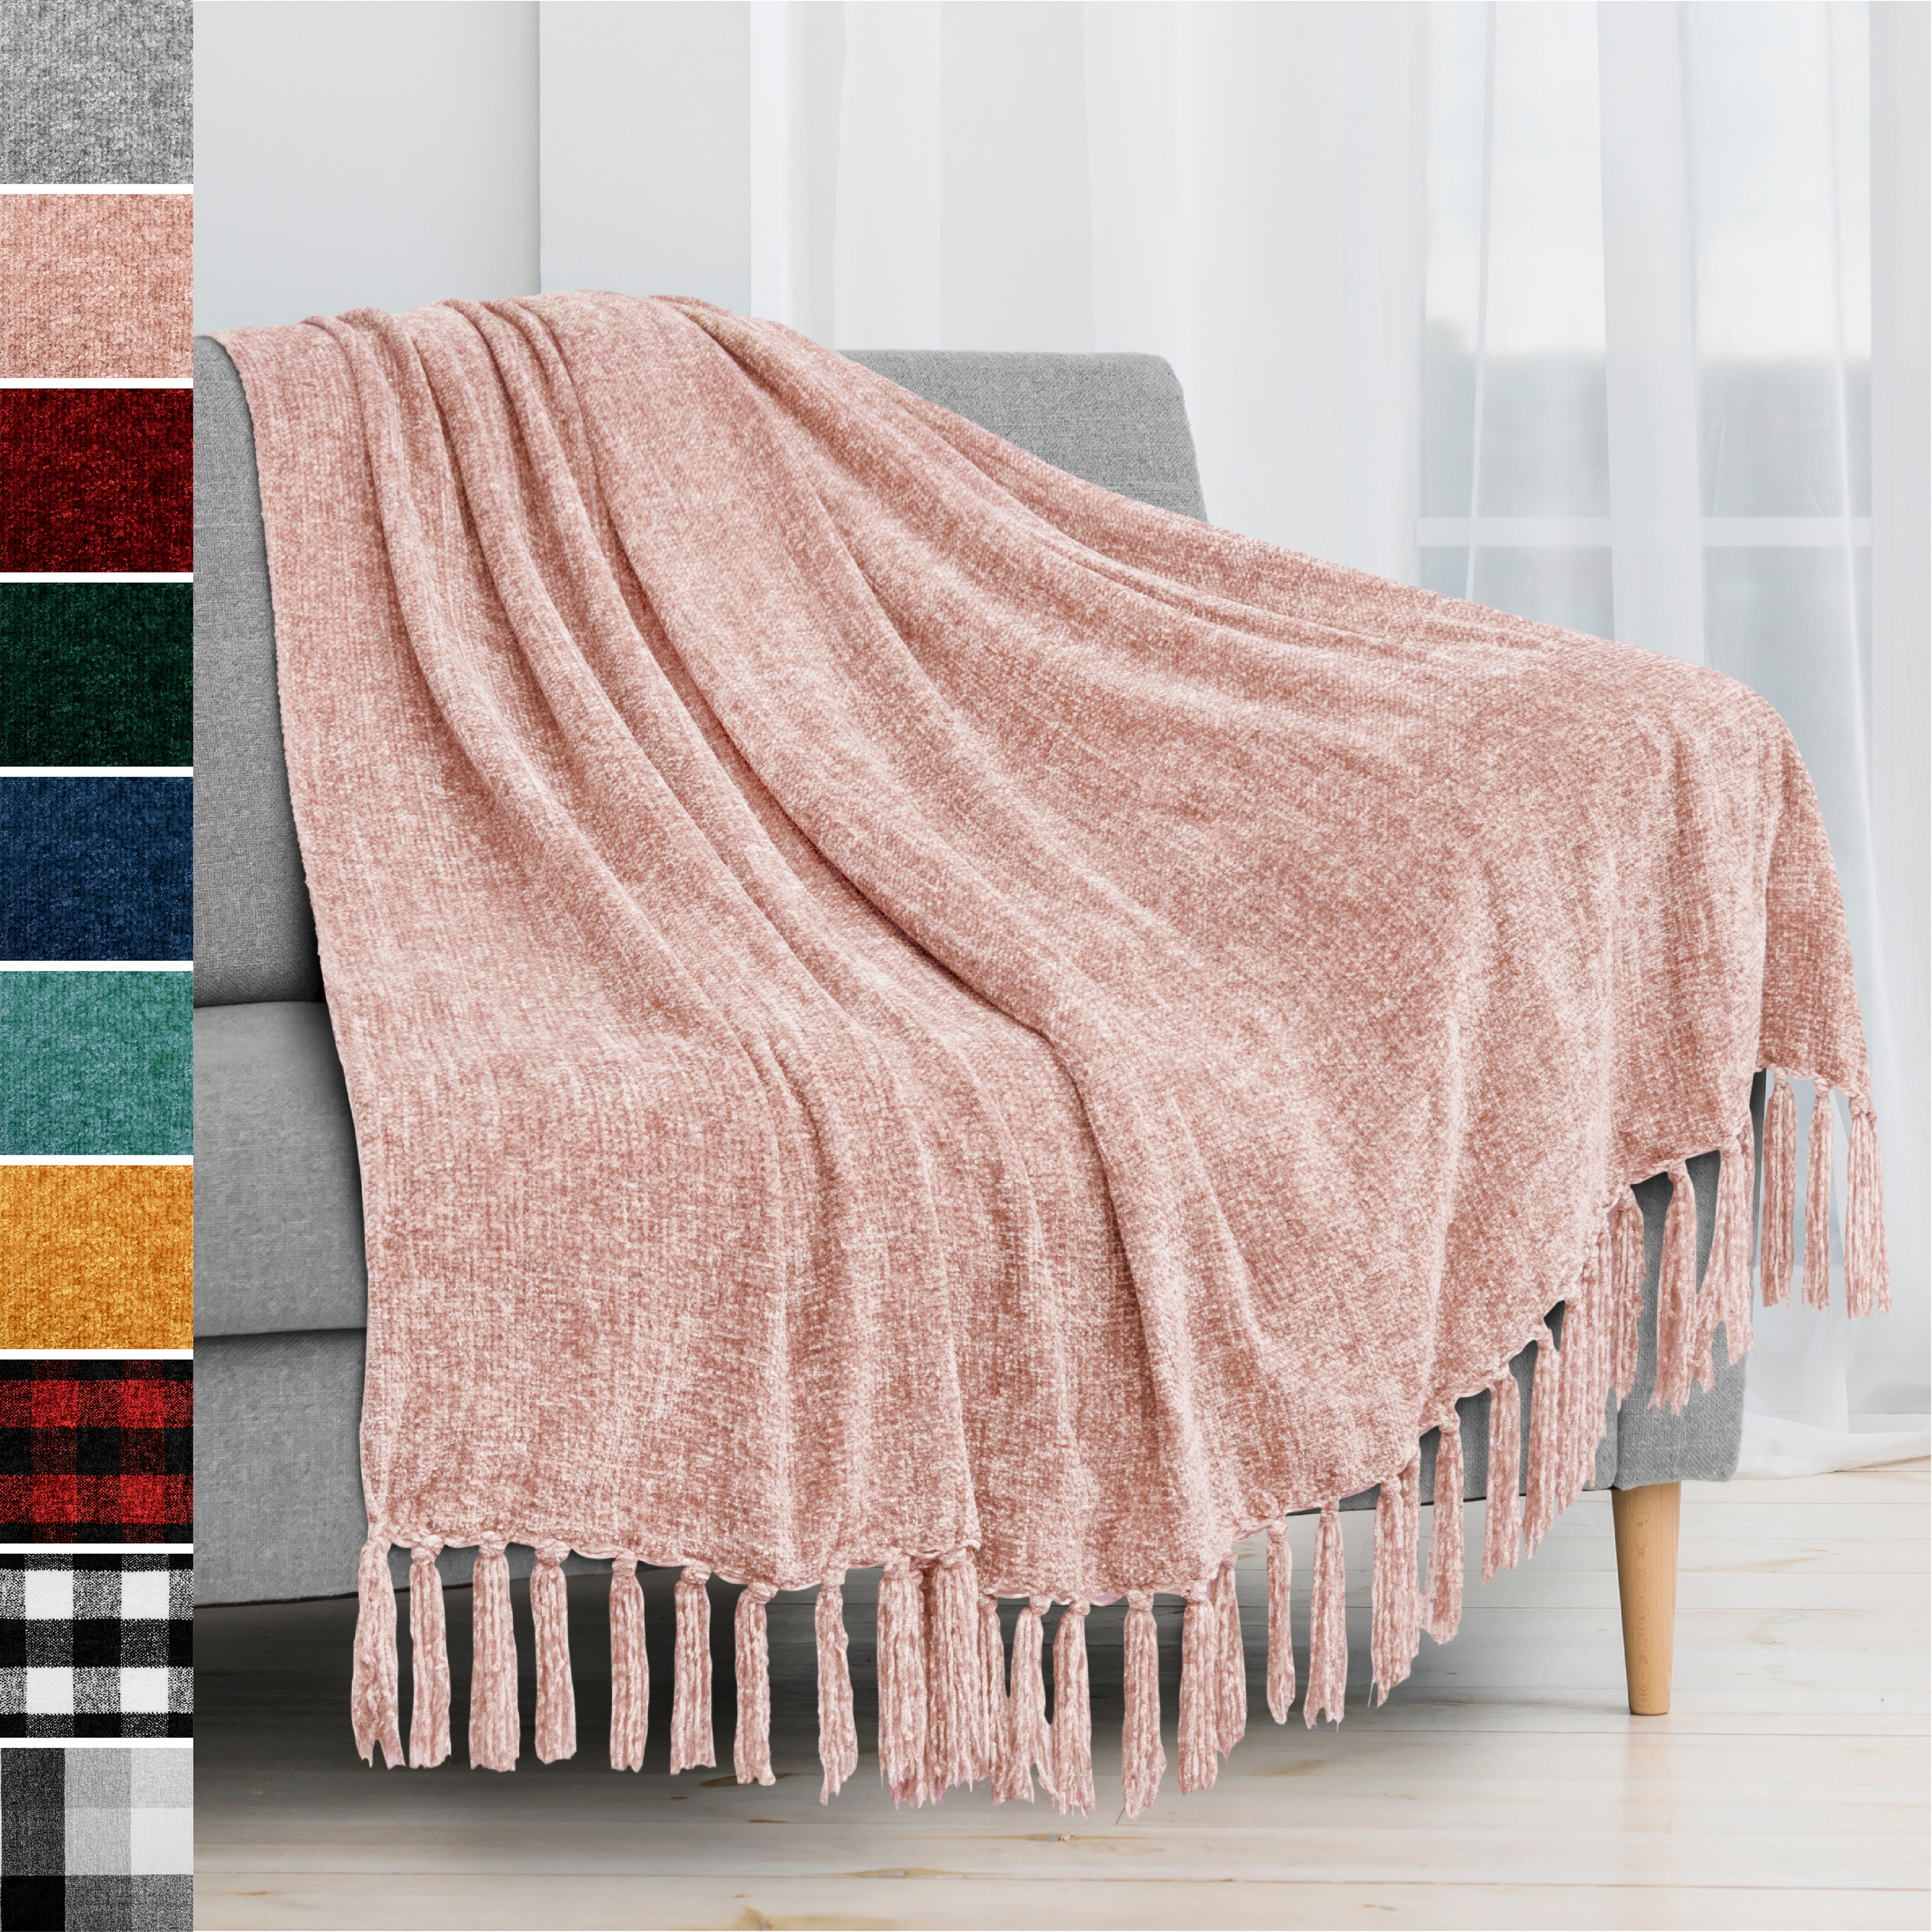 Lightweight Soft Cozy for Bed Sofa Chair White, 125x152cm BOURINA Fluffy Chenille Knitted Fringe Throw Blanket 